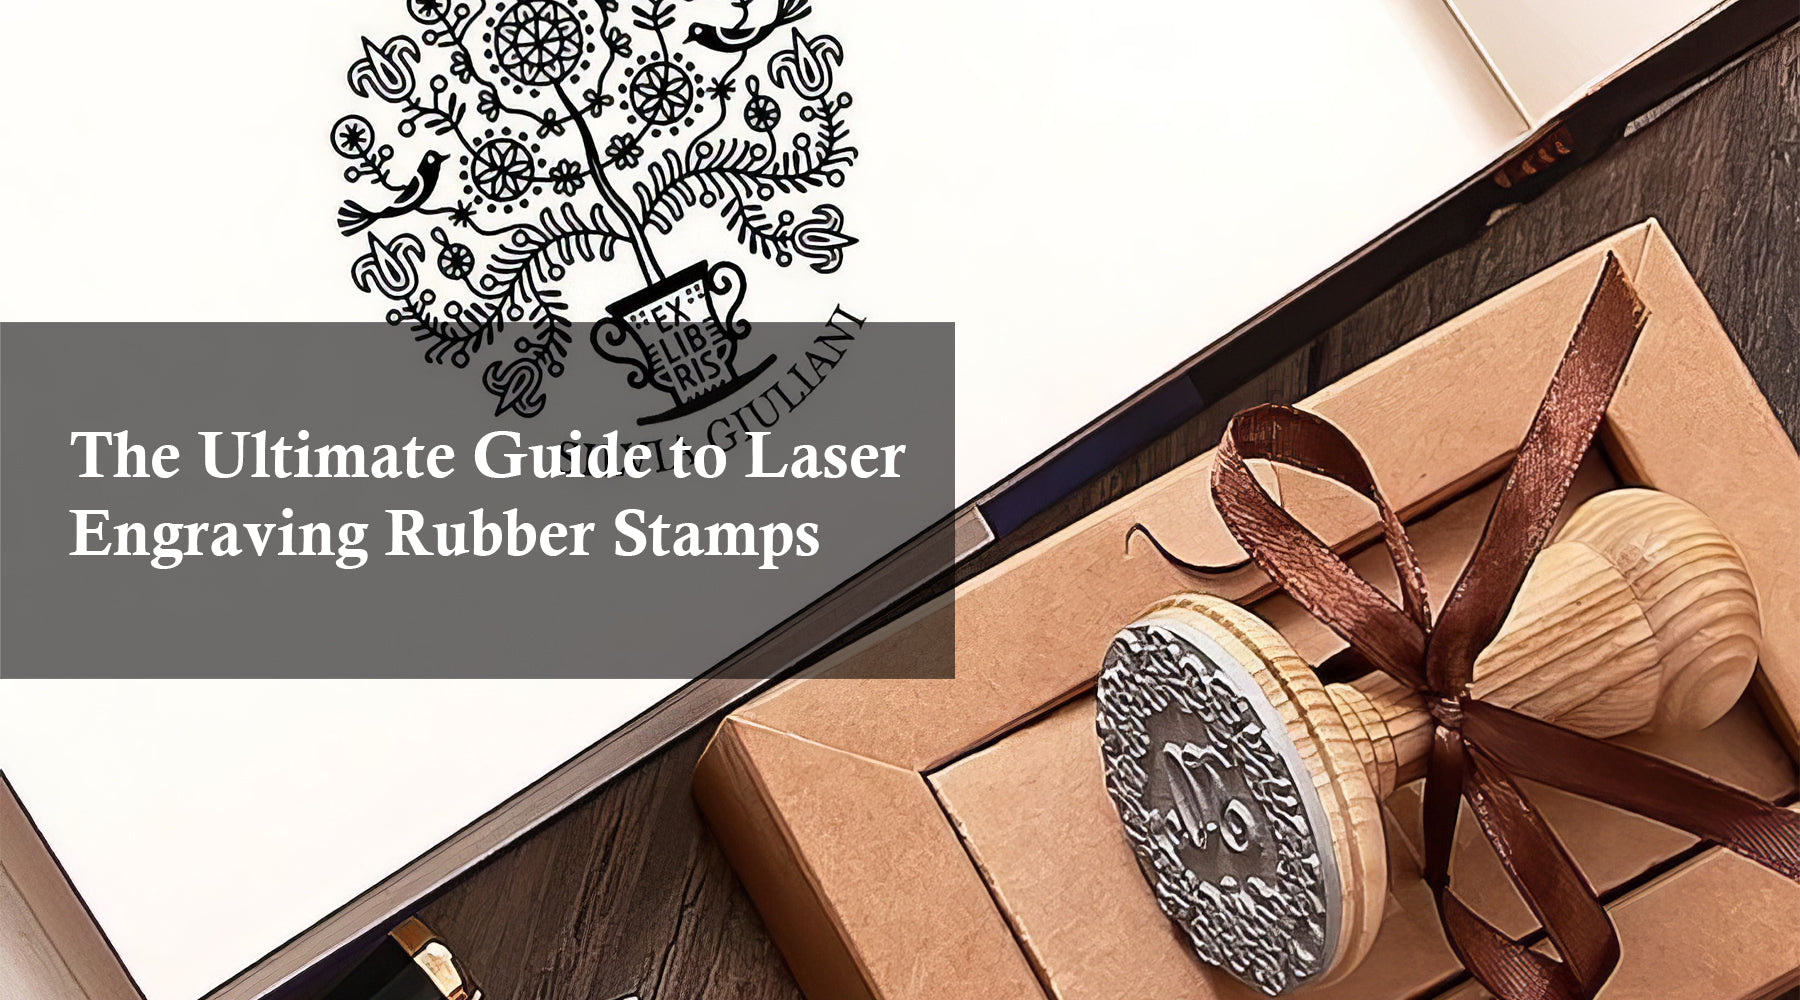 The Ultimate Guide to Laser Engraving Rubber Stamps